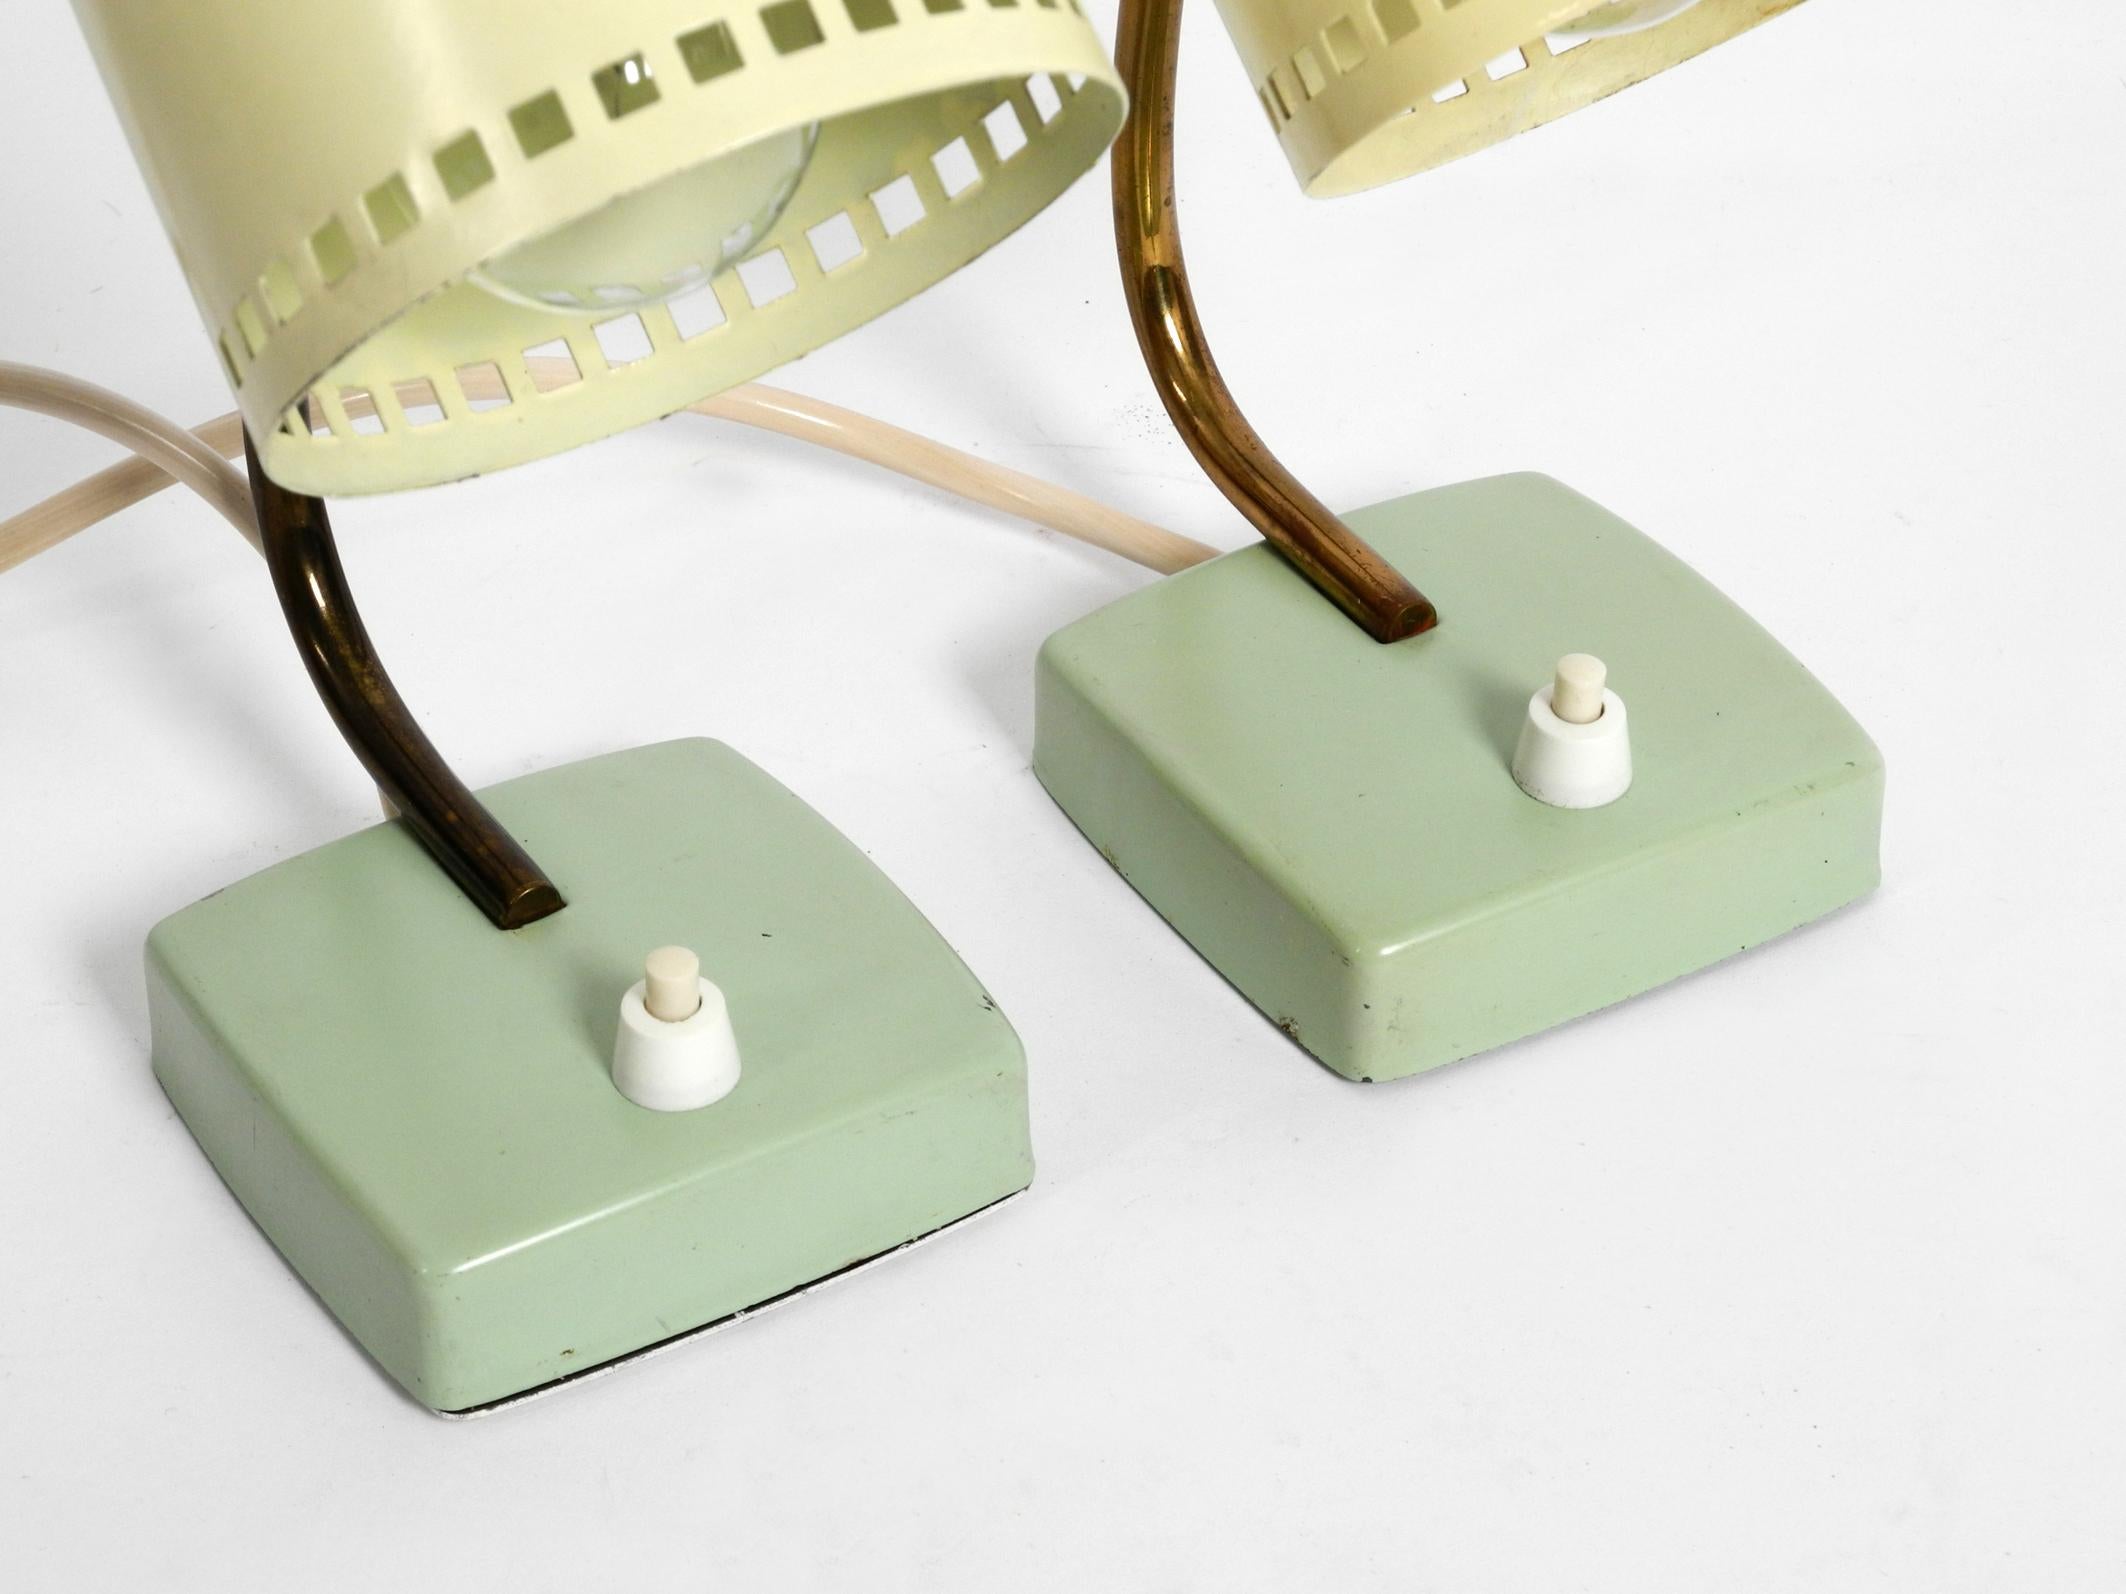 Mid-20th Century Pair of Beautiful Midcentury Metal Bedside Lamps in Mint Green and Yellow